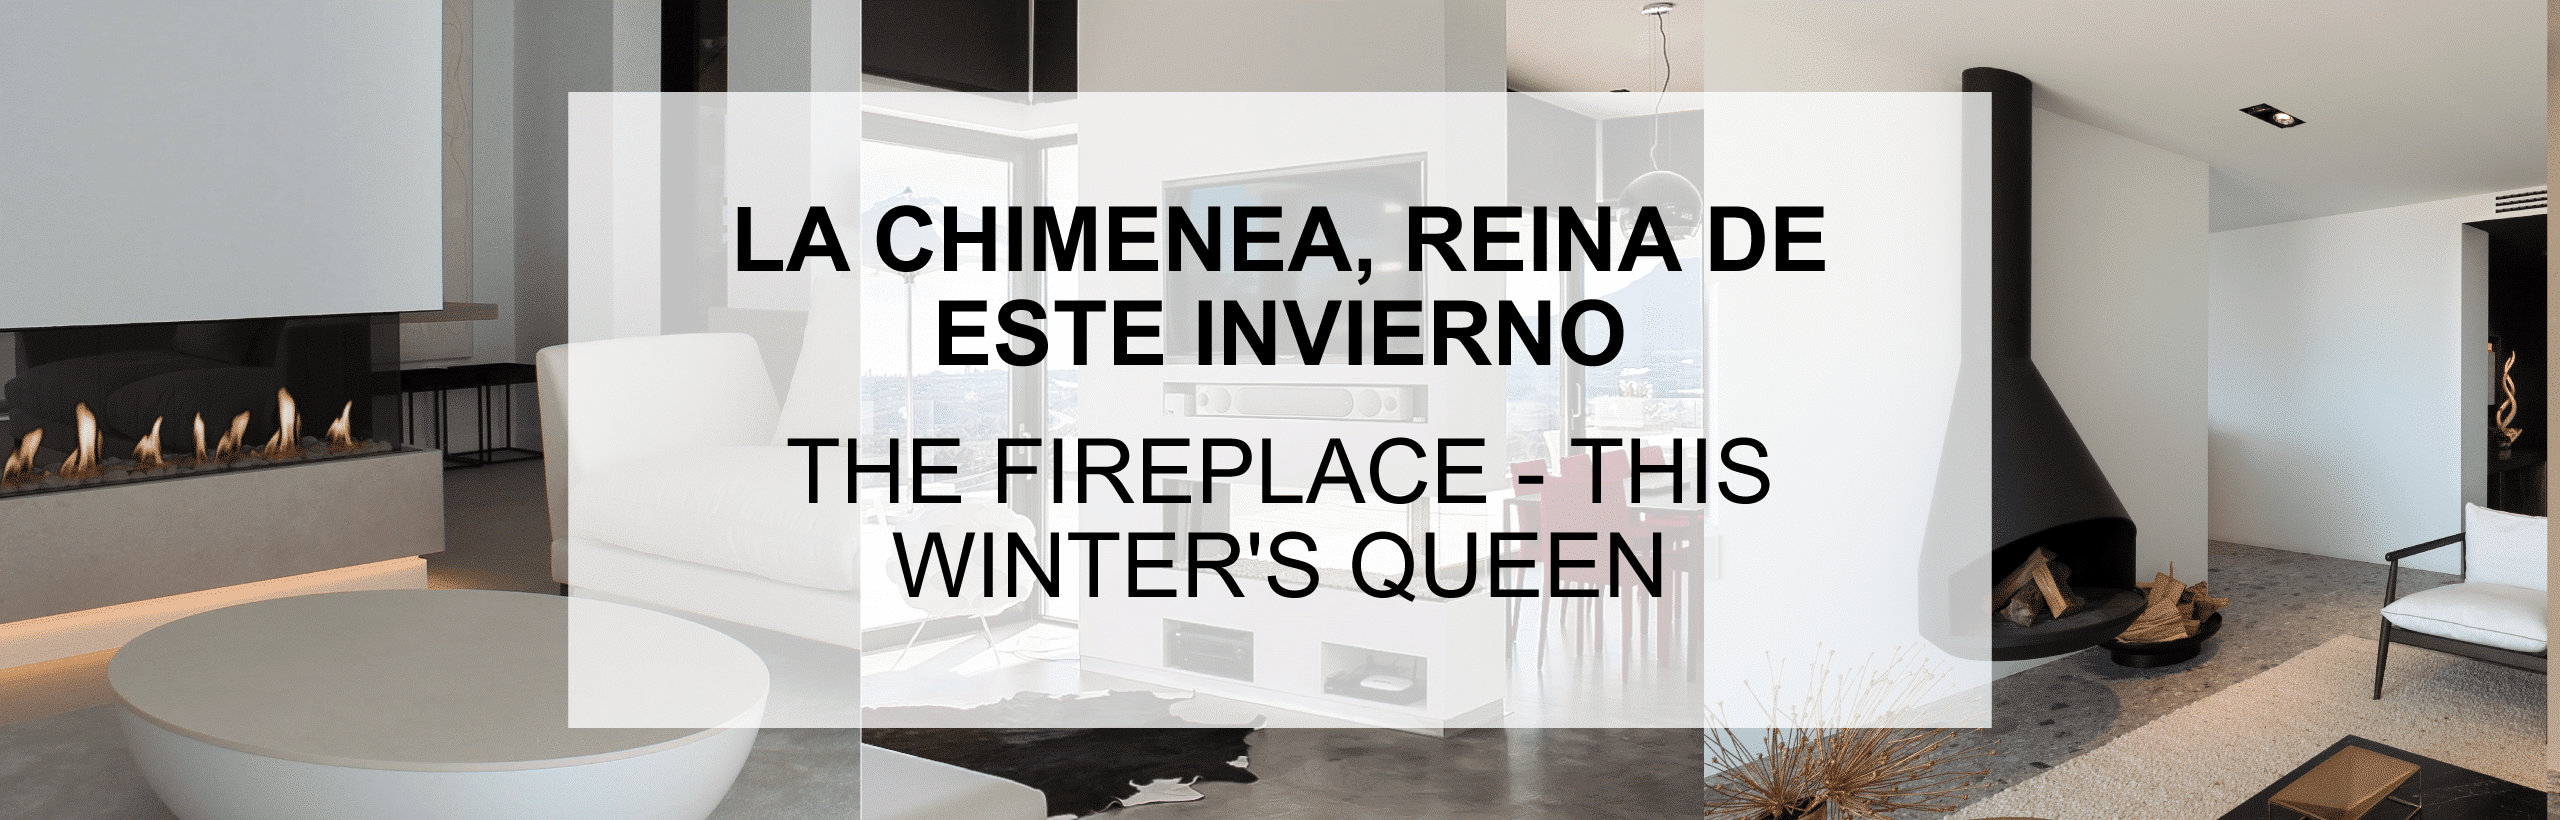 The fireplace - this winter's queen